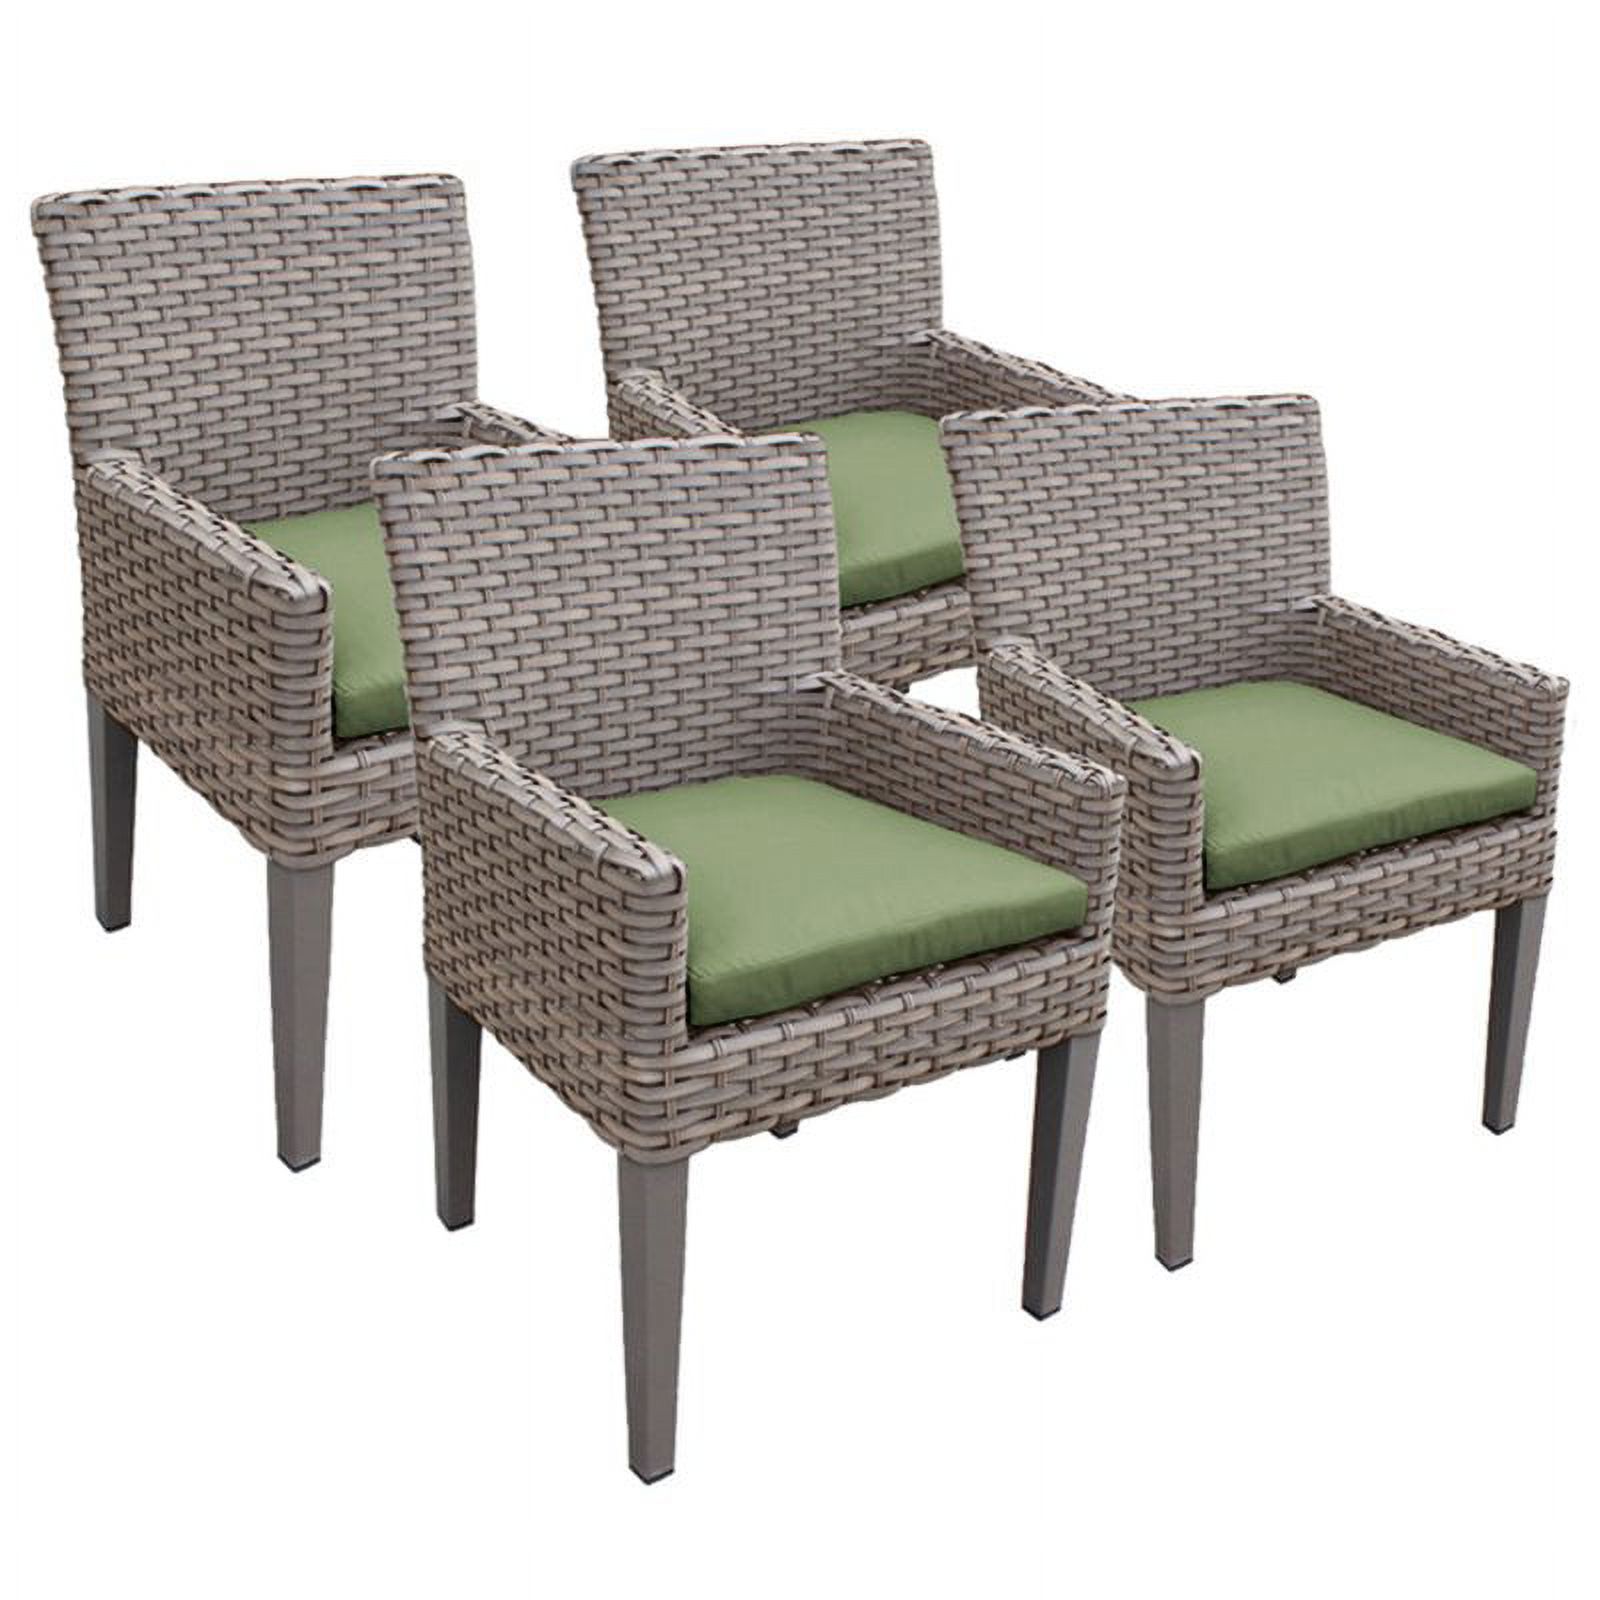 TK Classics Oasis Patio Dining Arm Chair in Green (Set of 4) - image 1 of 2